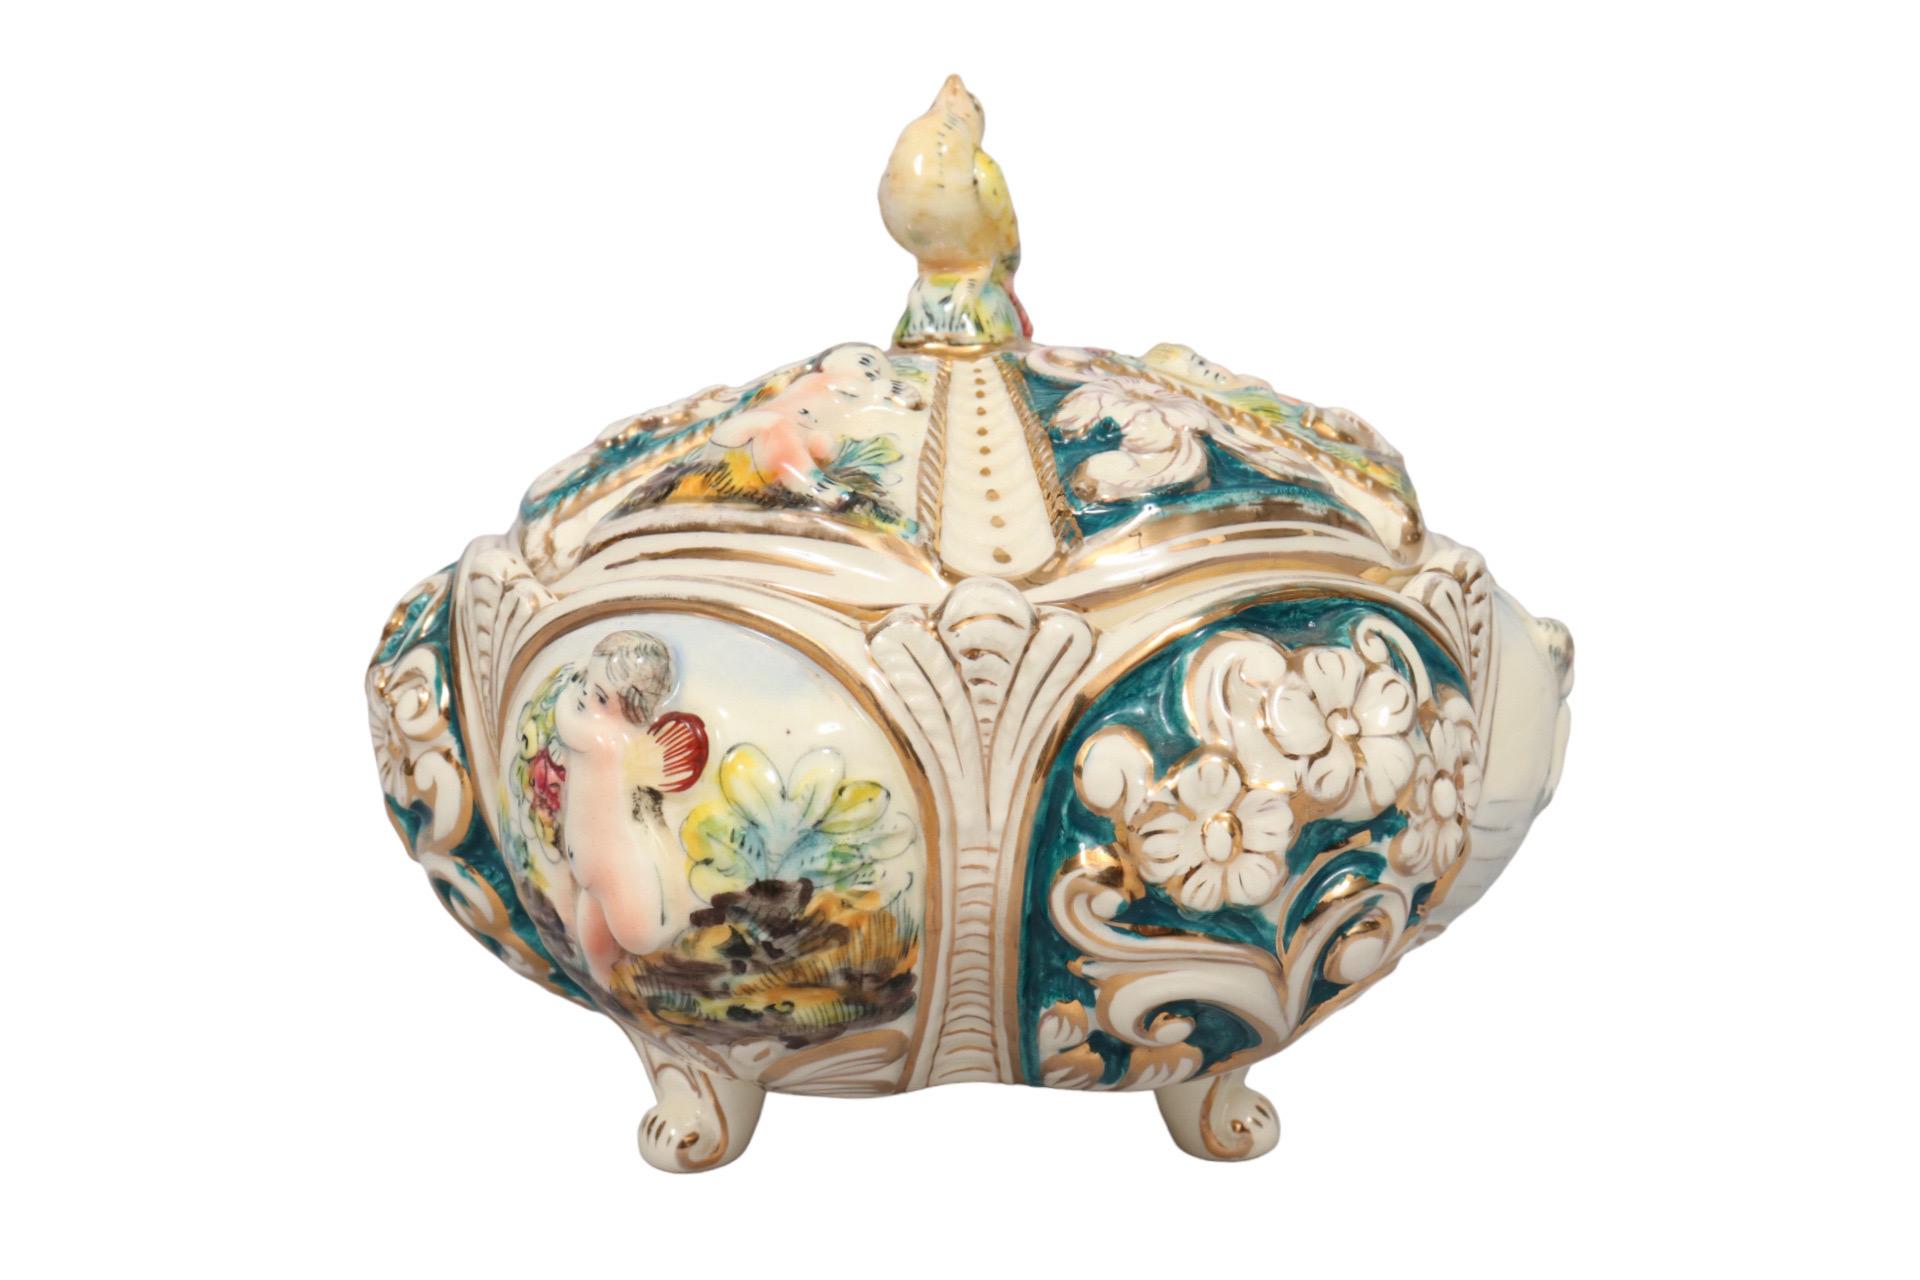 An Italian Capodimonte style ceramic lidded bowl. Decorated with six faces in a bombé shape. Playful embossed cherubs alternate with embossed flowers painted in lavish jewel tones edged in gold. The lid is similarly decorated, topped with a colorful